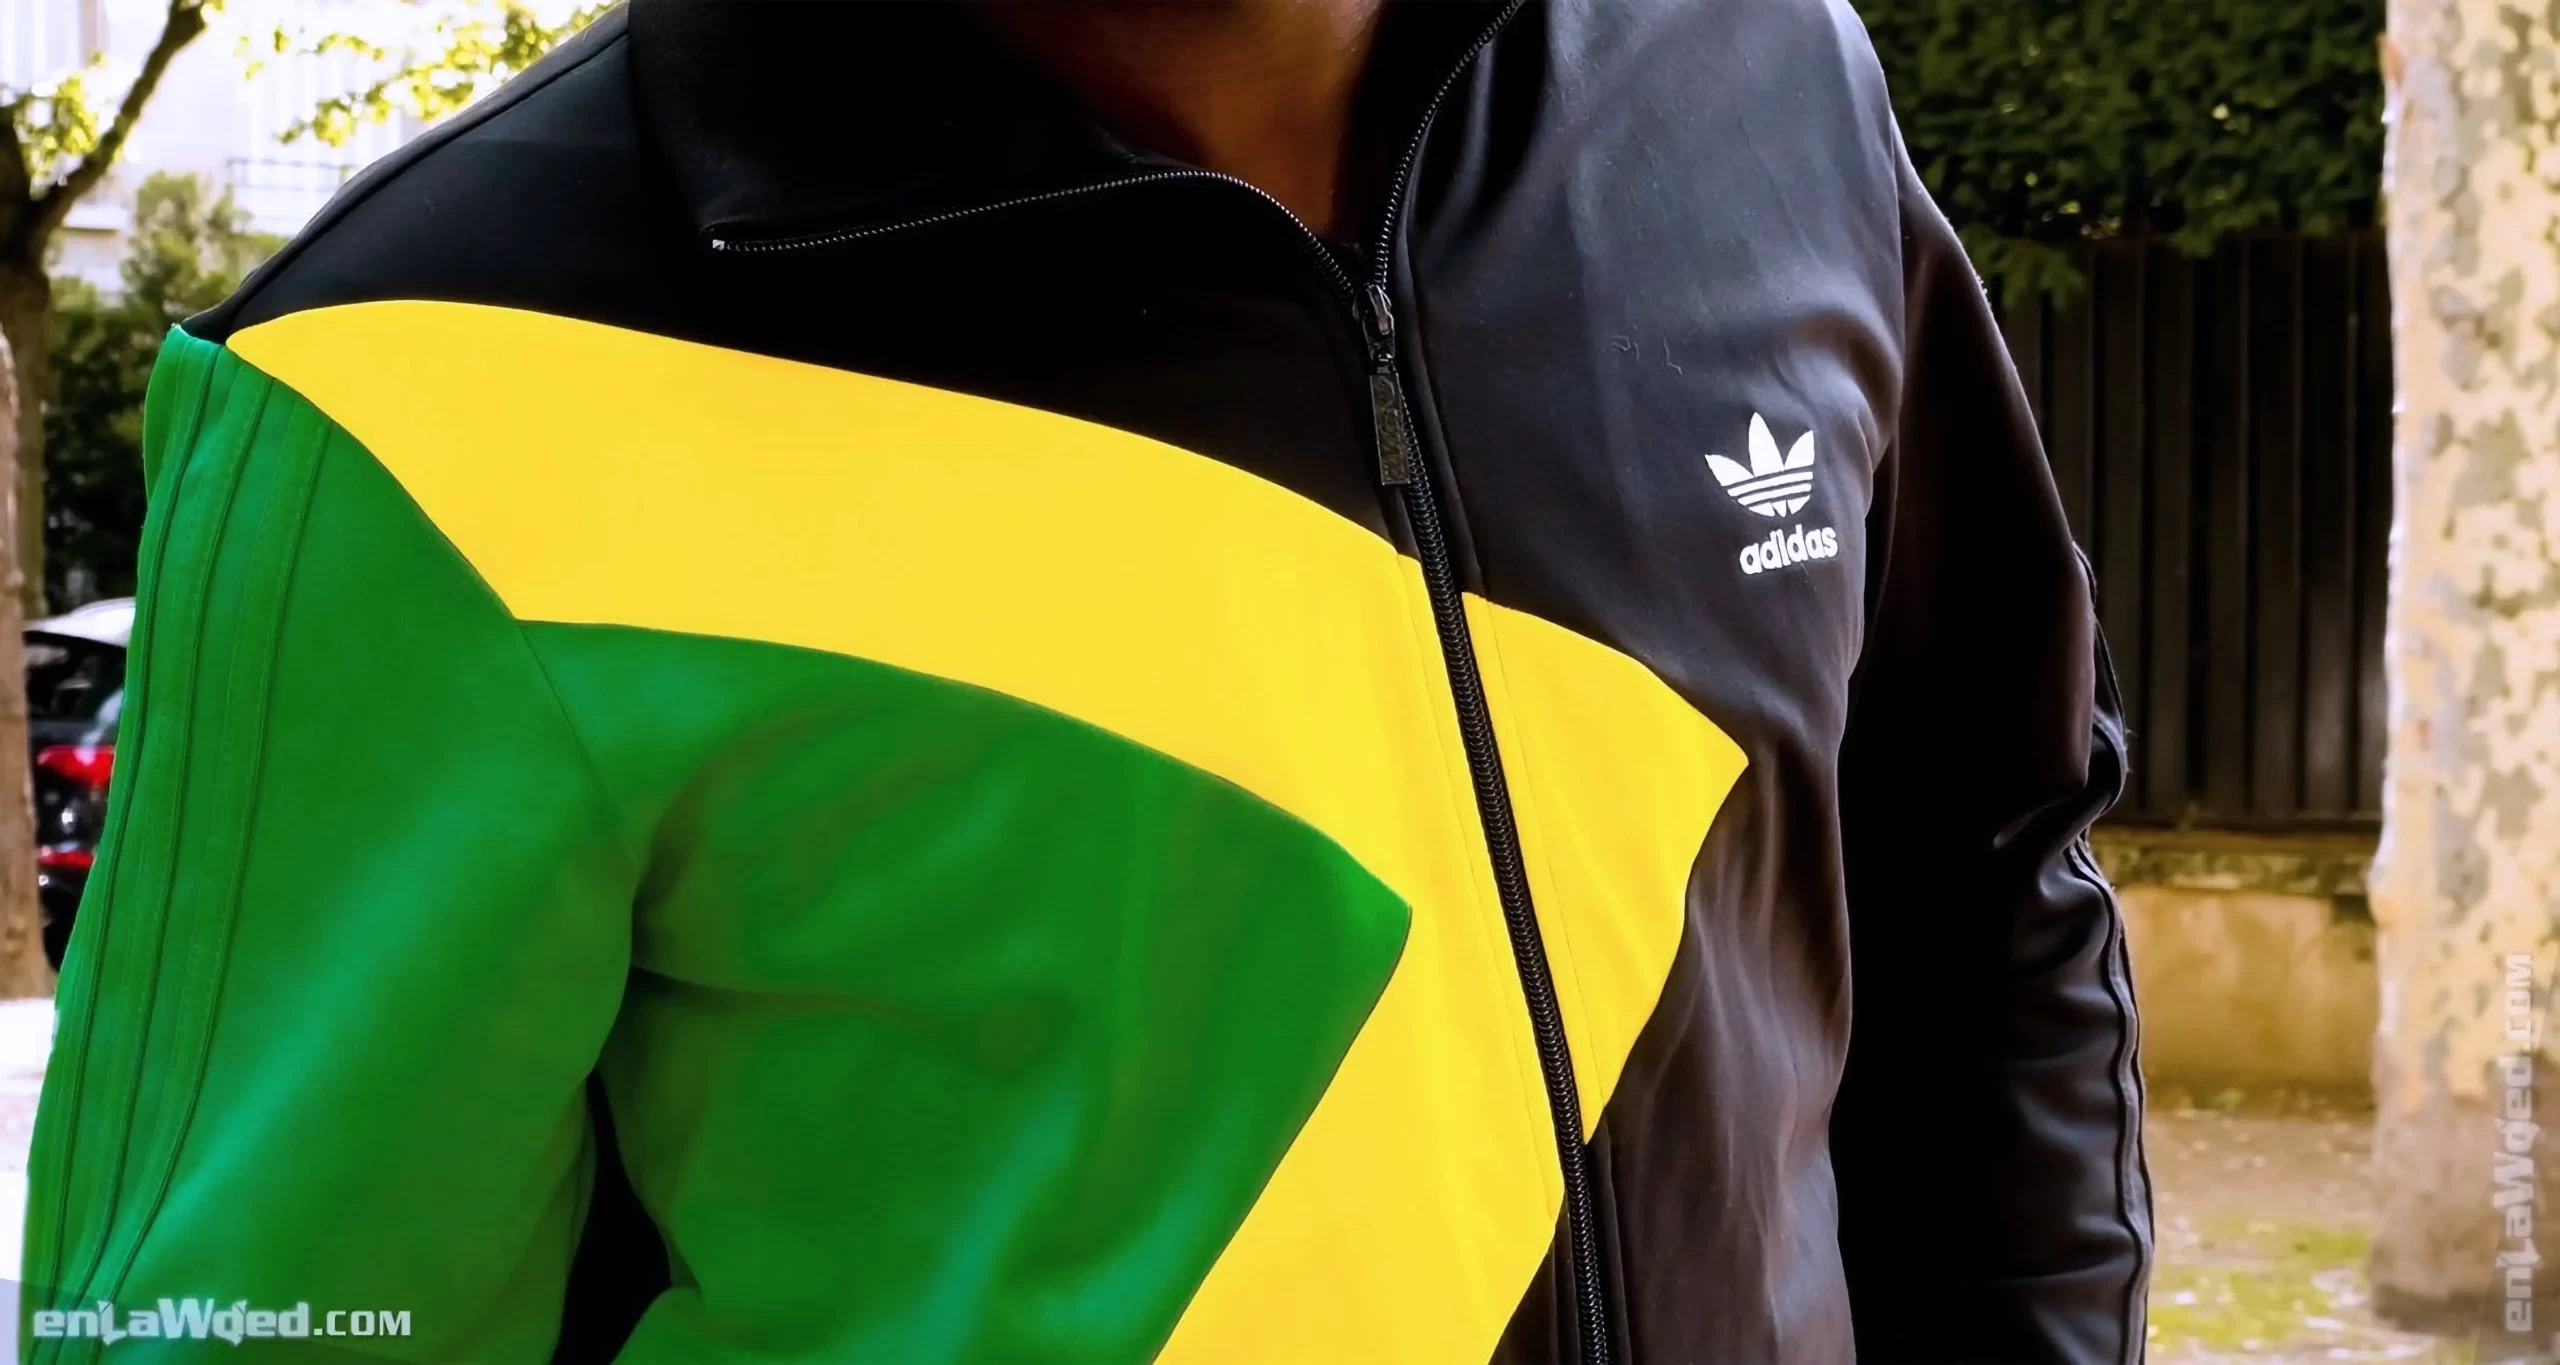 Men’s 2007 Cool Runnings Movie Track Top by Adidas: Recognized (EnLawded.com file #lmch95h1amfxm6dguqo)